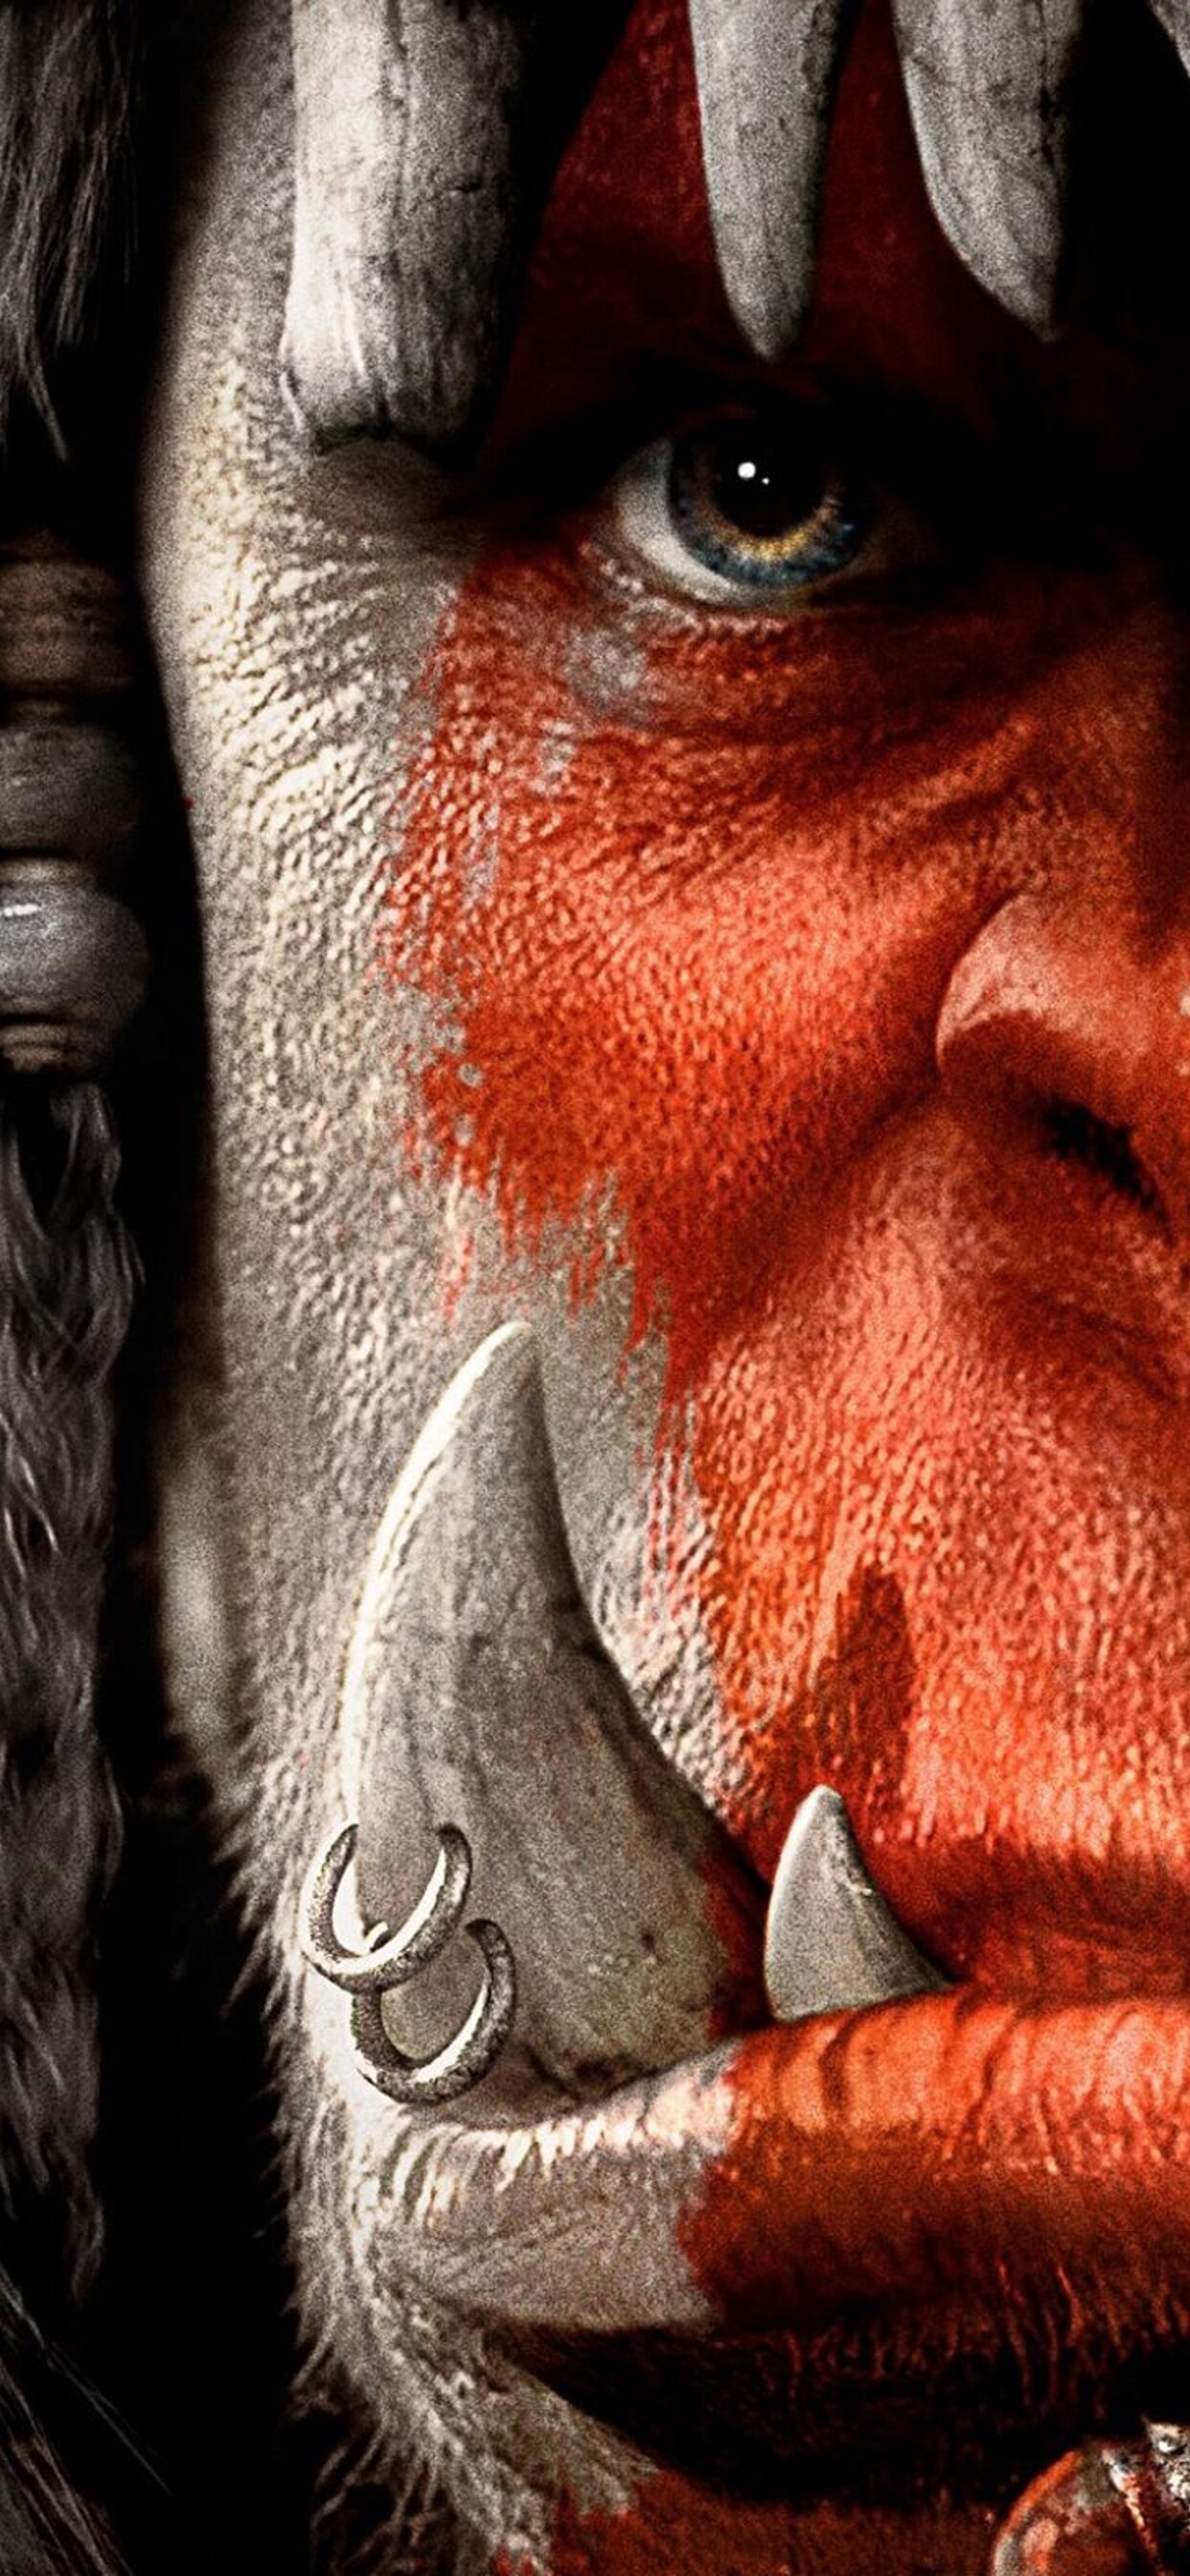 Warcraft (Movie): The film grossed $47.4 million at the box office in the United States. 1250x2690 HD Background.